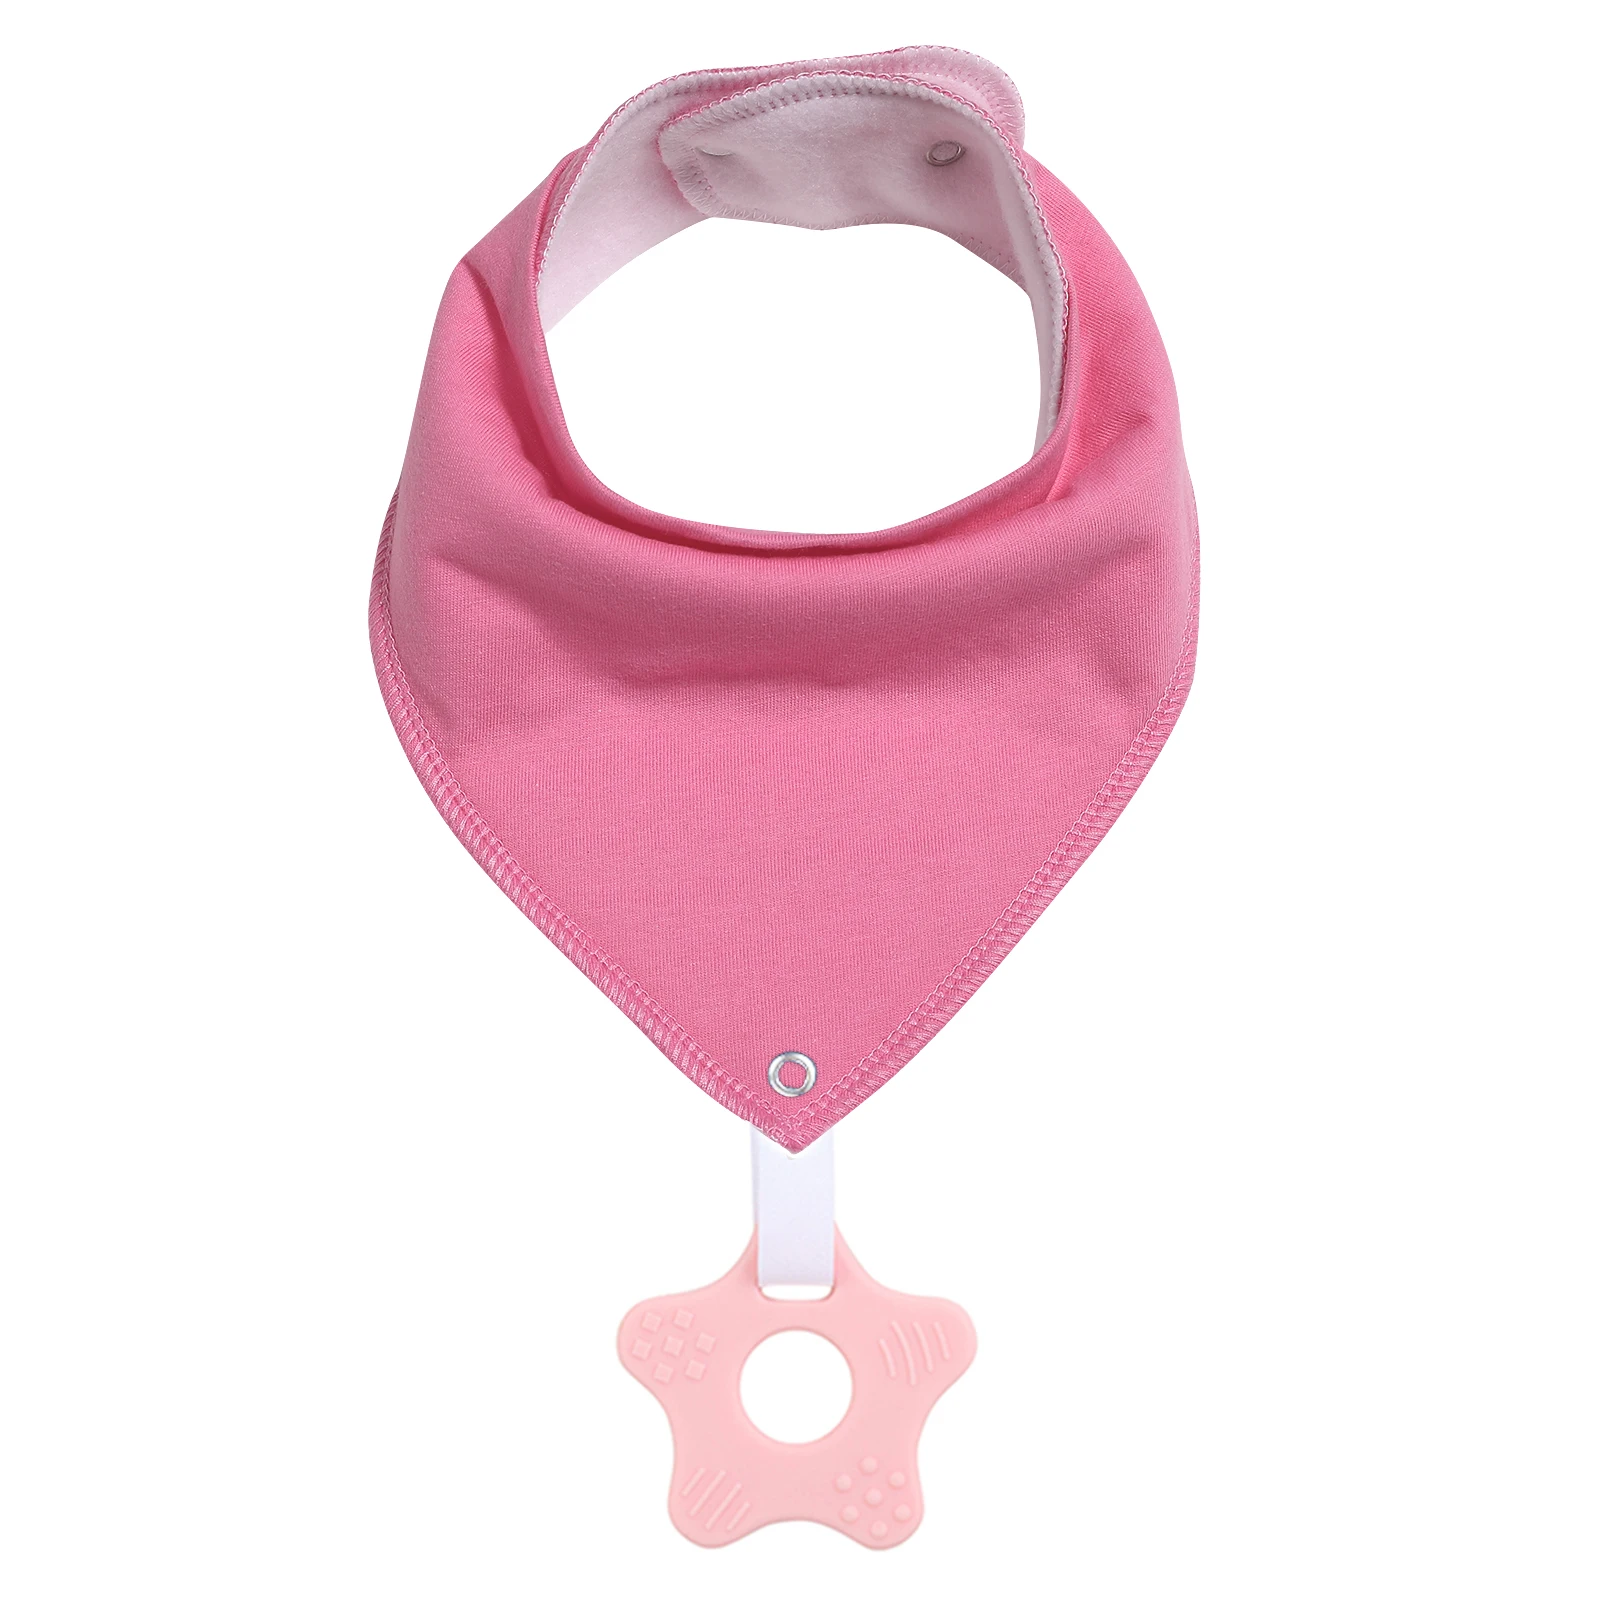 baby accessories girl 100% Organic Cotton Baby Bandana Drool Bibs and Teething Toys Super Absorbent and Soft Unisex Newborn Baby Bibs100% Organic Cotton Baby Bandana Drool Bibs and Teething Toys Super Absorbent and Soft Unisex Newborn Baby Bibs baby stroller toys Baby Accessories